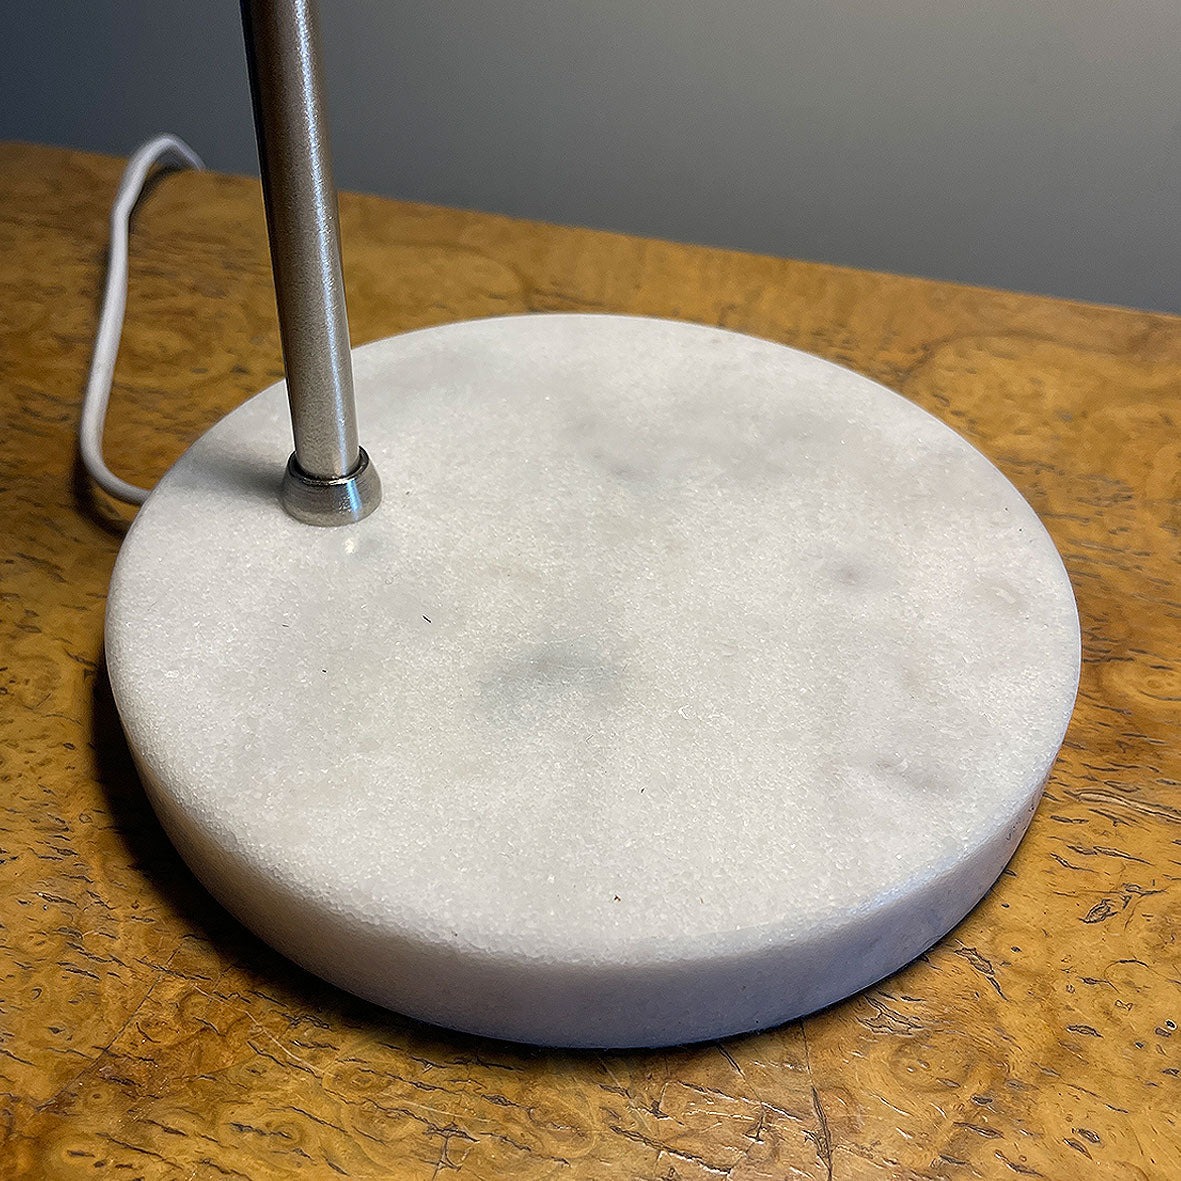 A stylish Carlo Task Lamp with contrasting brushed aluminium metal work with a grey marble base. The lamp head is adjustable and can be positioned in an up or down position - SHOP NOW - www.intovintage.co.uk